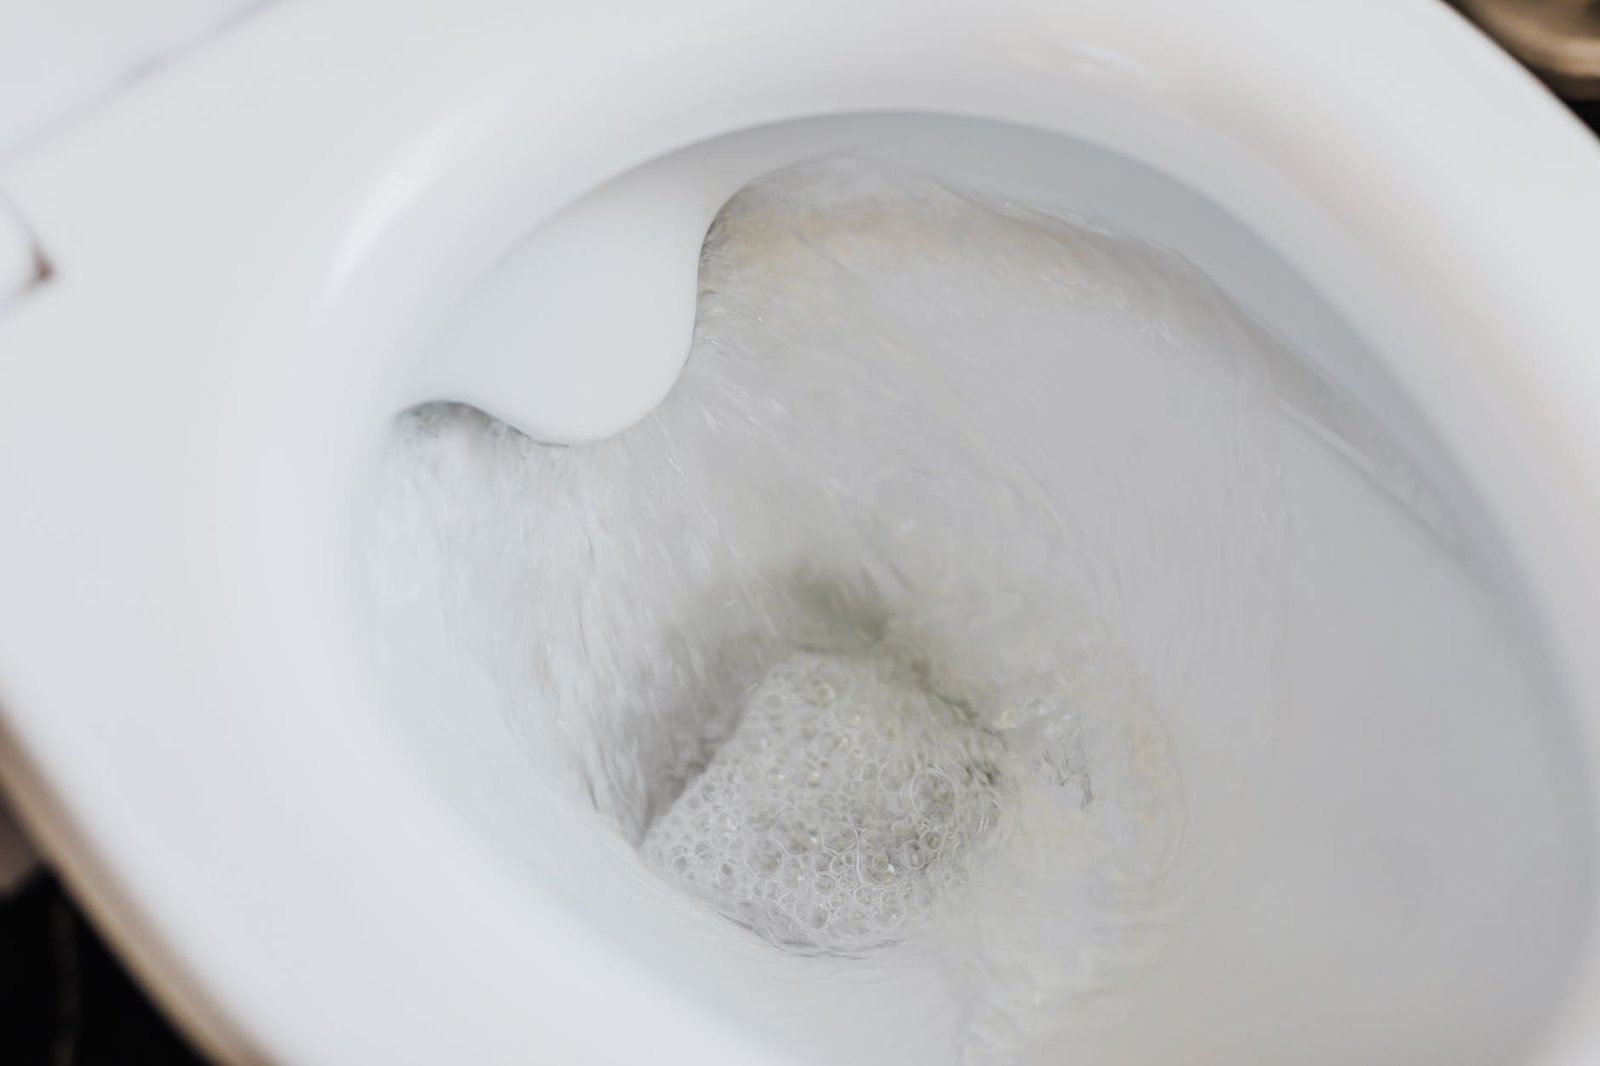 How to clean your toilet naturally with citric acid - The Thrifty Island Girl